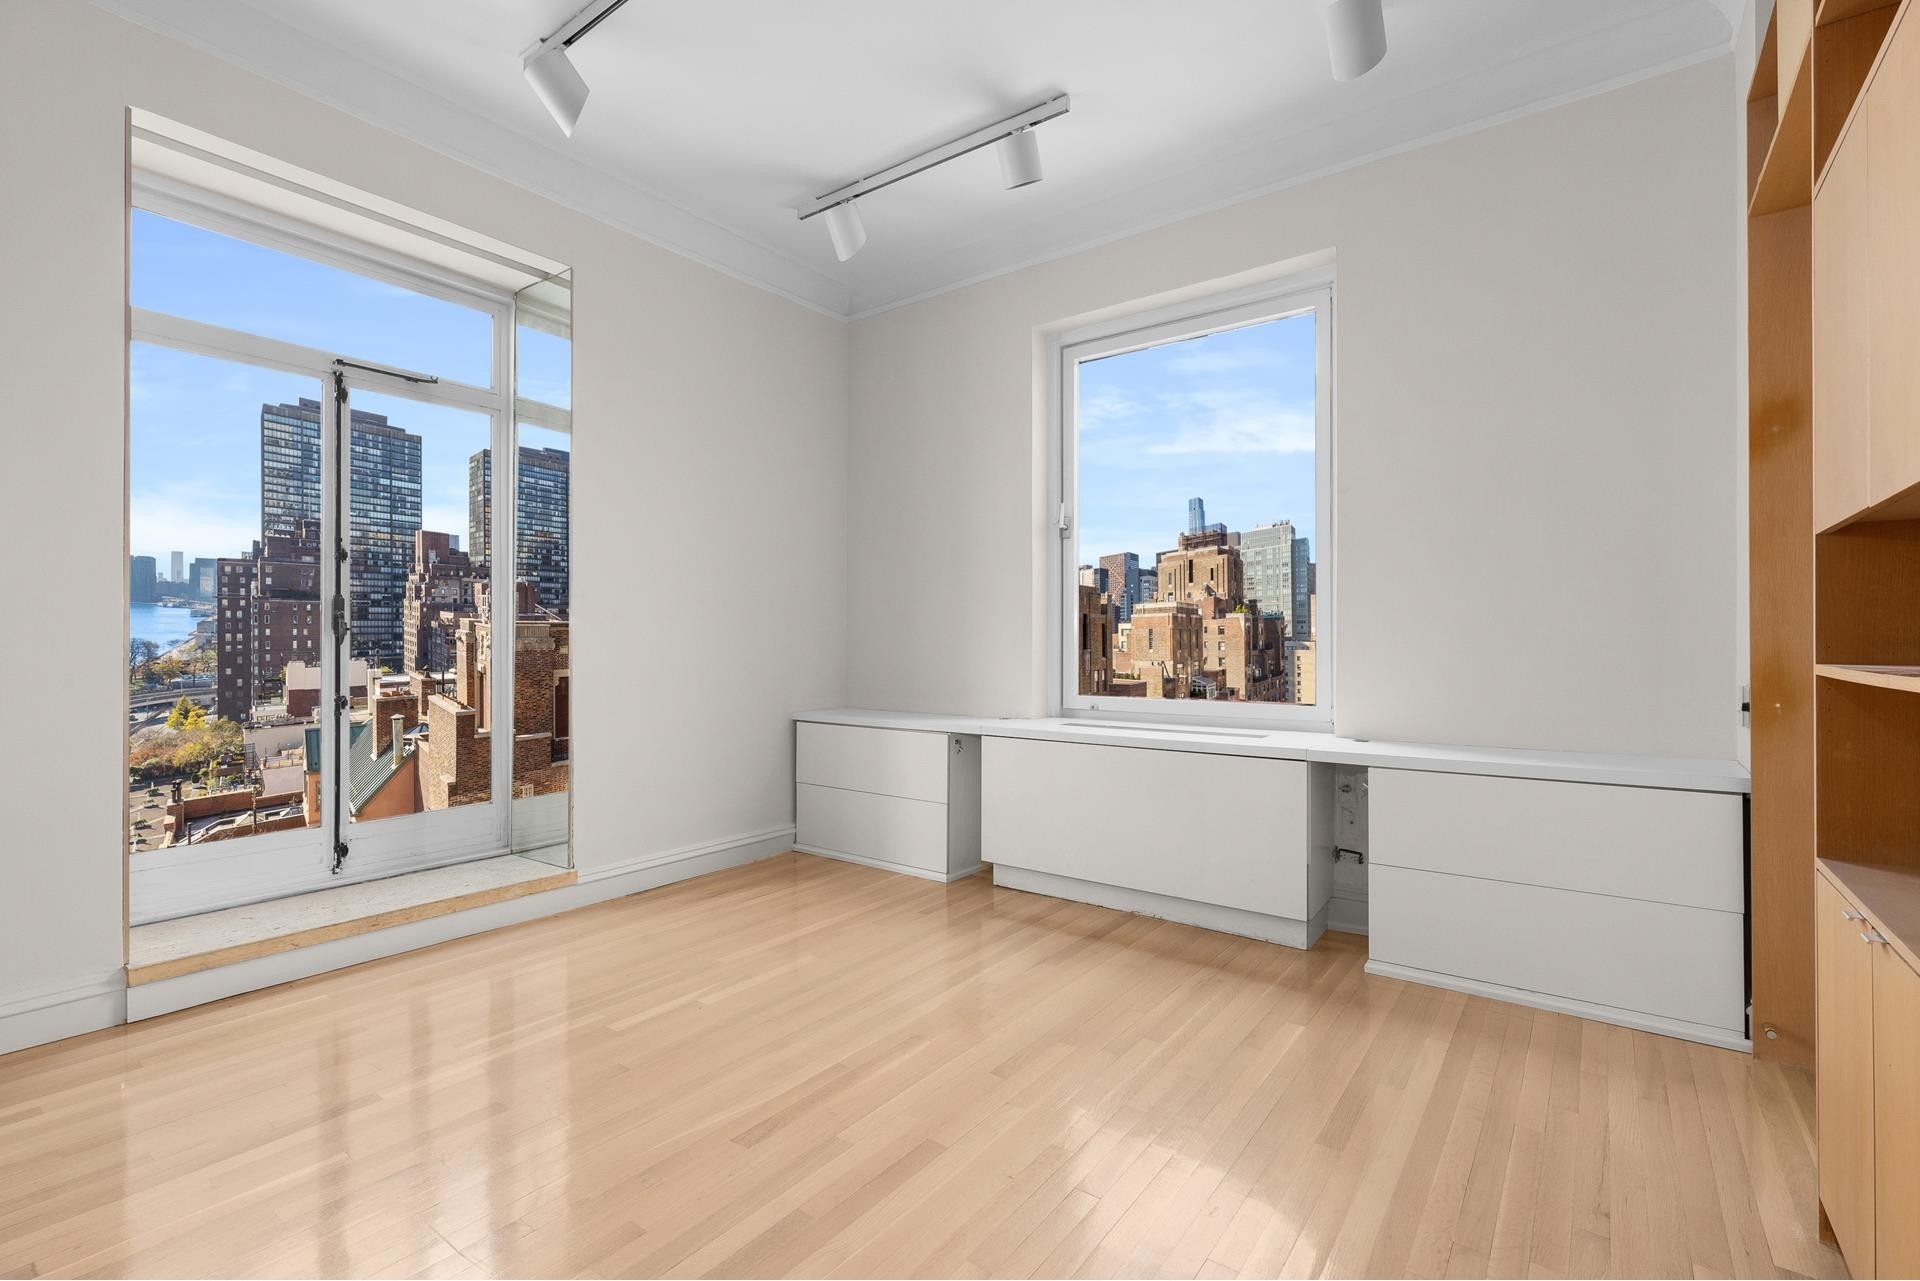 22. Co-op Properties for Sale at RIVER HOUSE, 435 E 52ND ST, 15A Beekman, New York, NY 10022